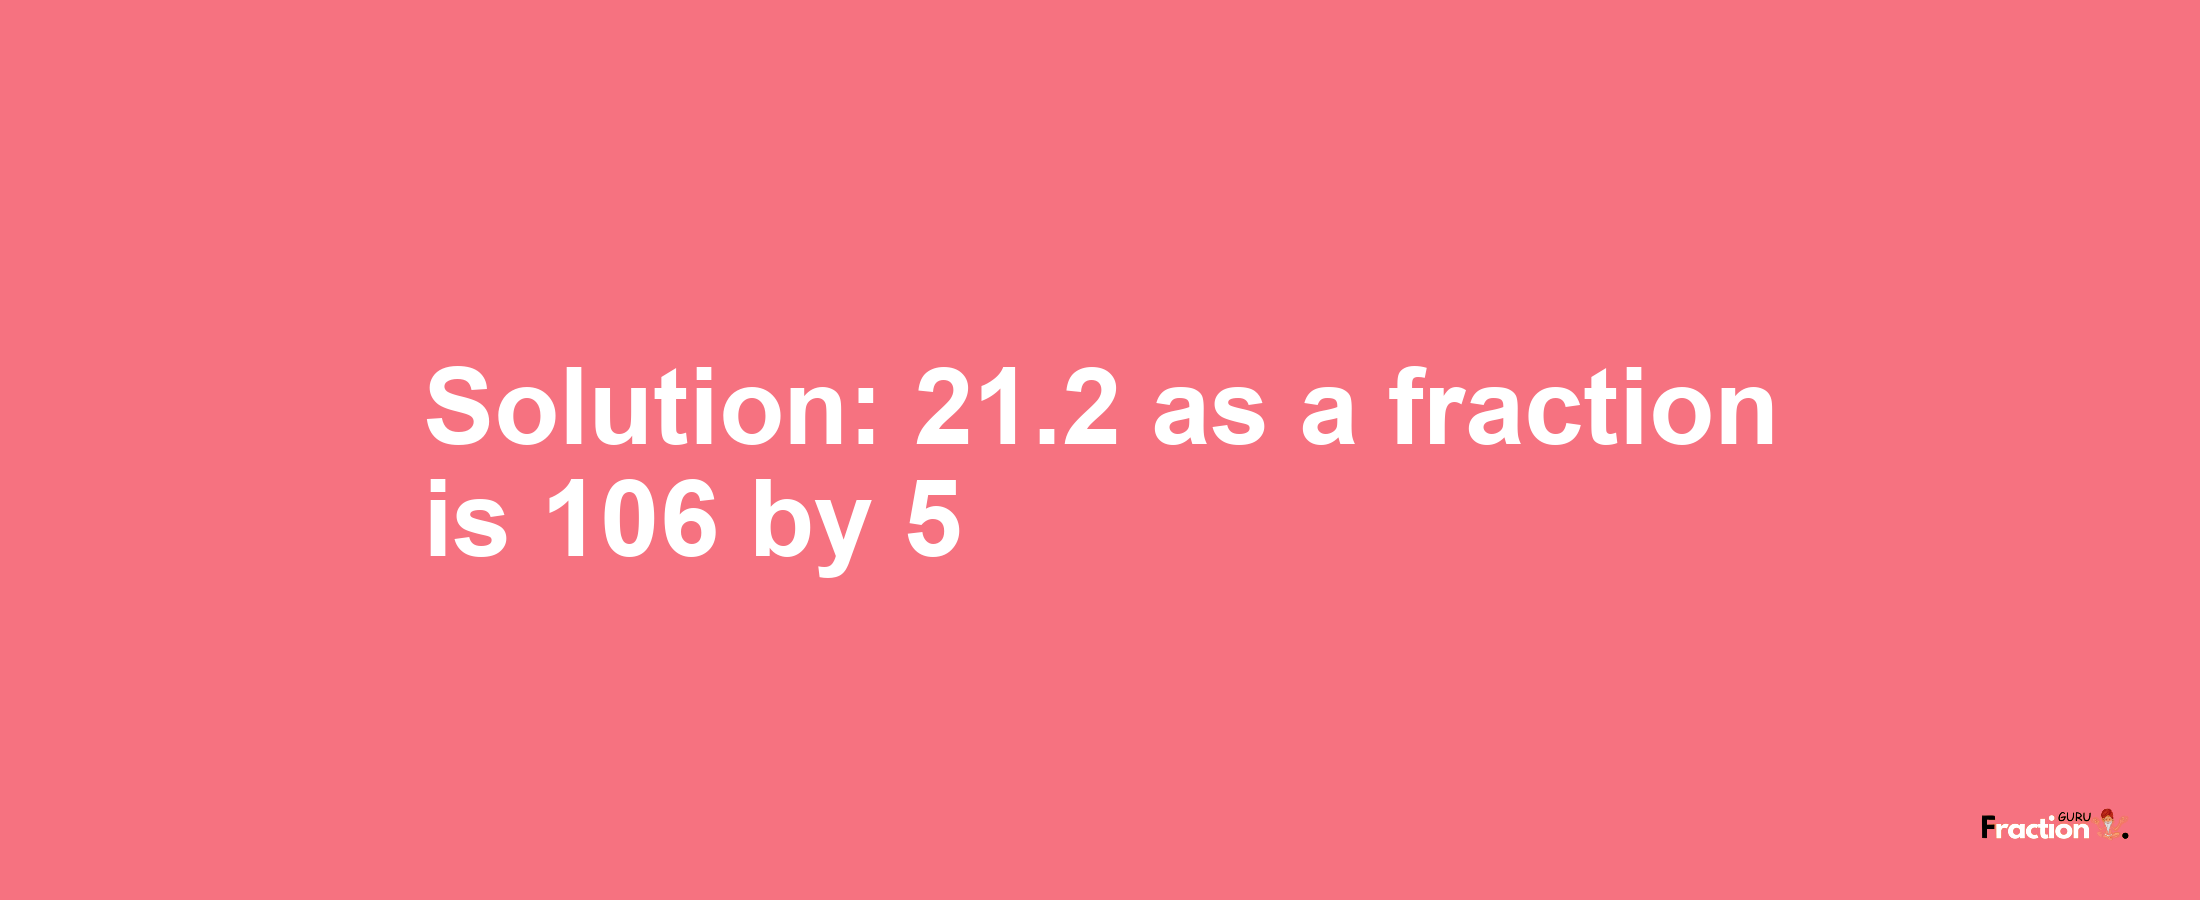 Solution:21.2 as a fraction is 106/5